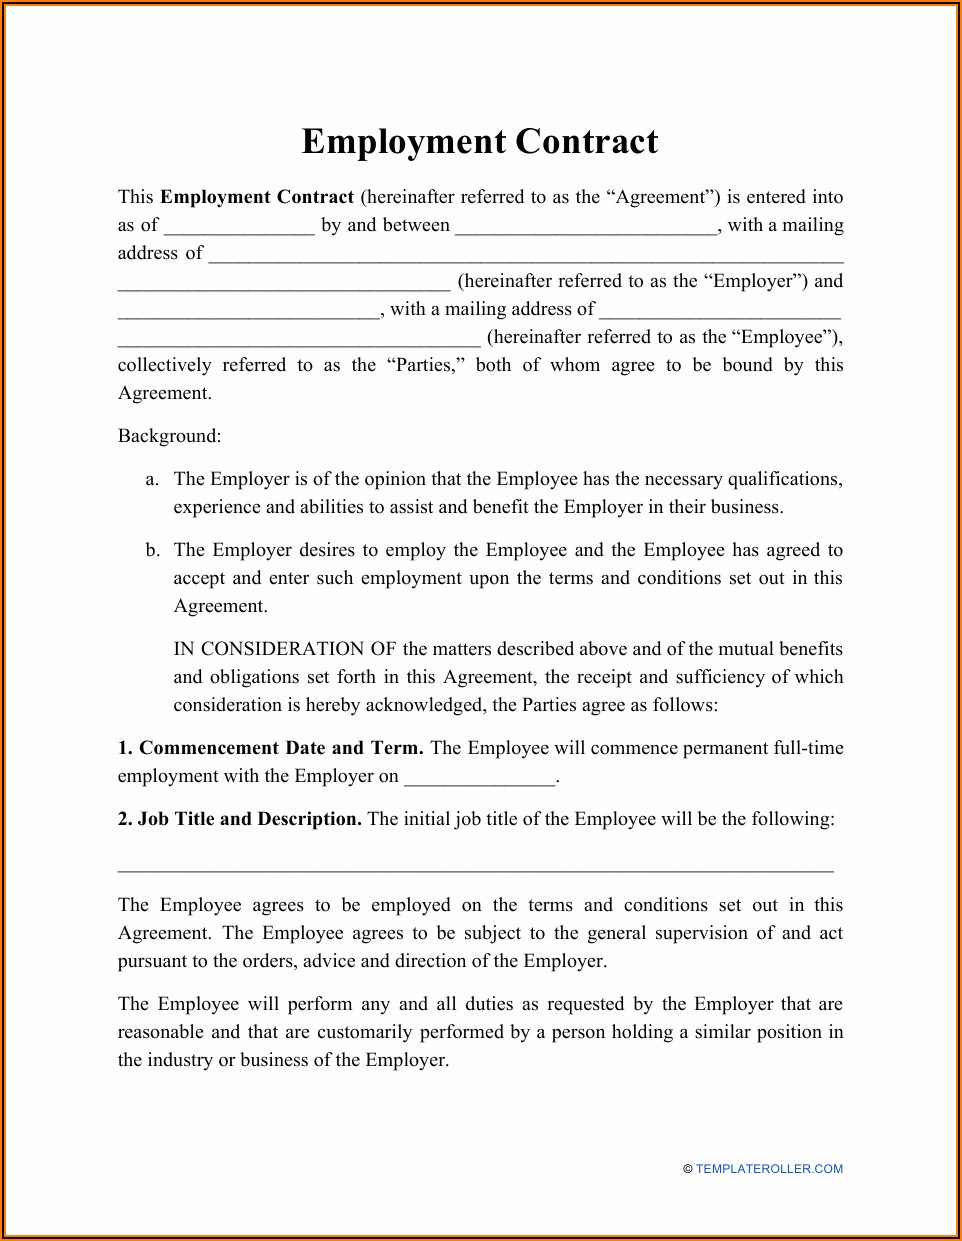 Employment Contract Terms And Conditions Template